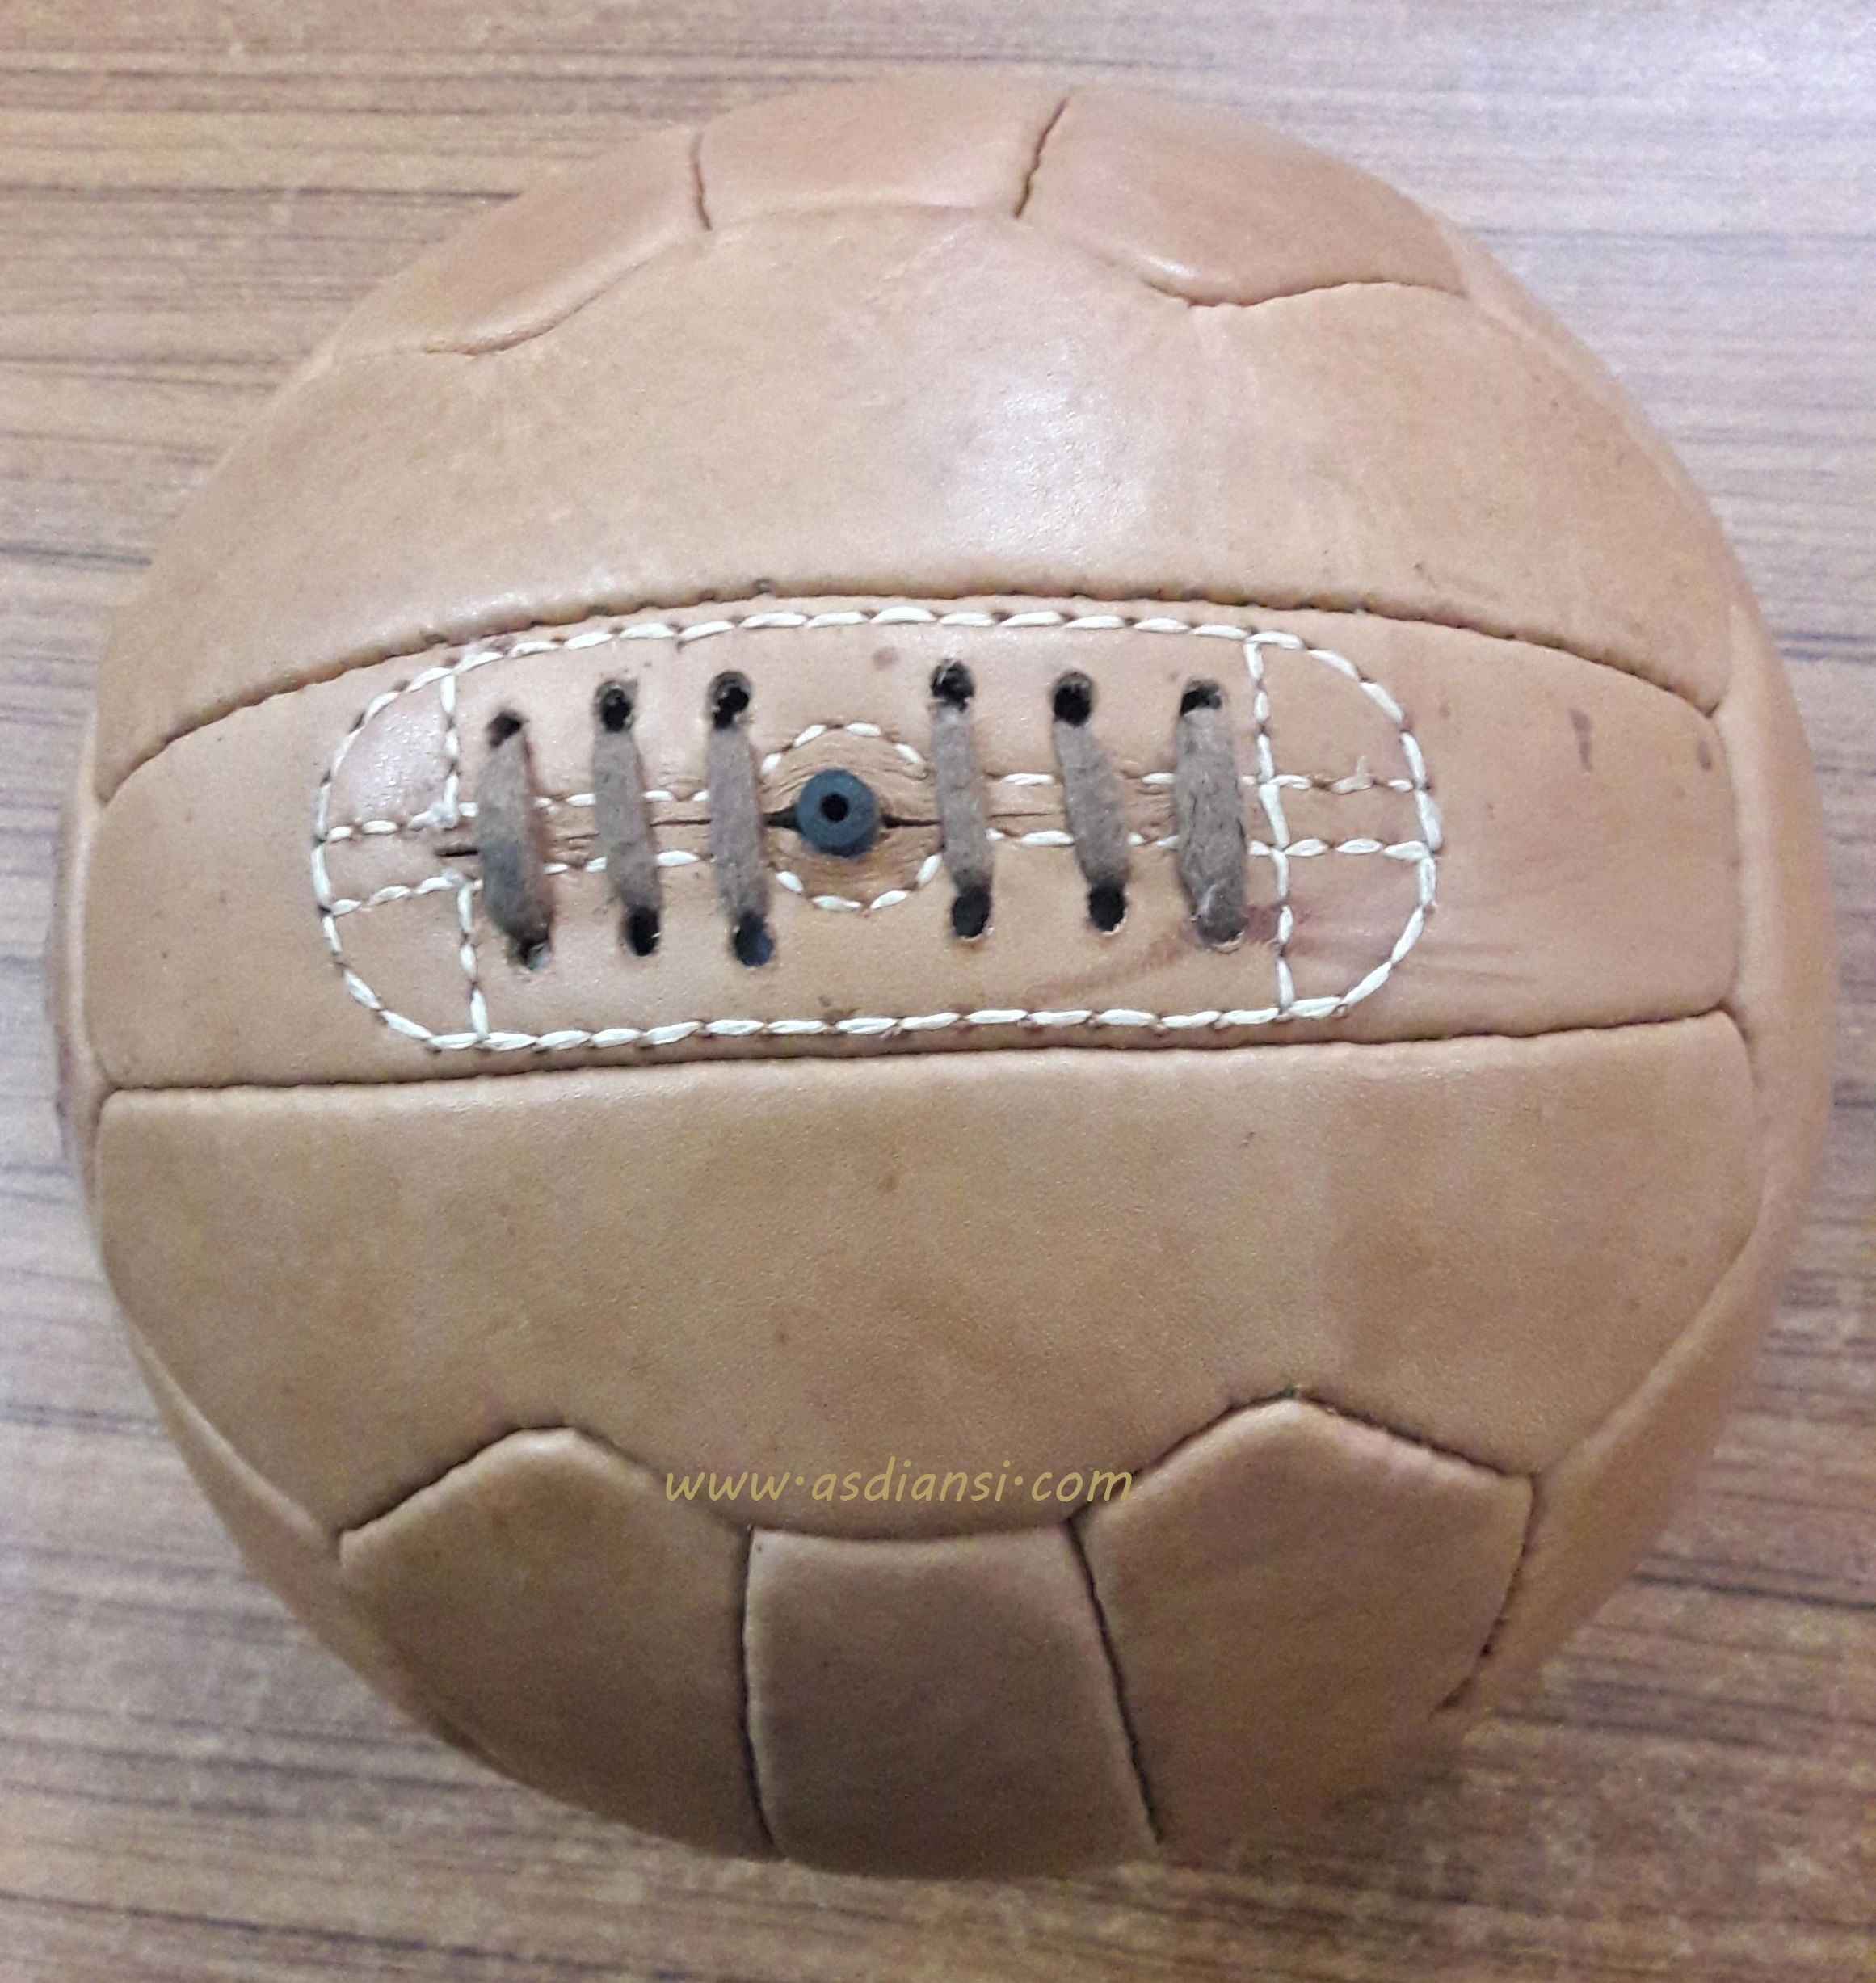 
Antique leather hand made football retro Leather Soccer Ball 